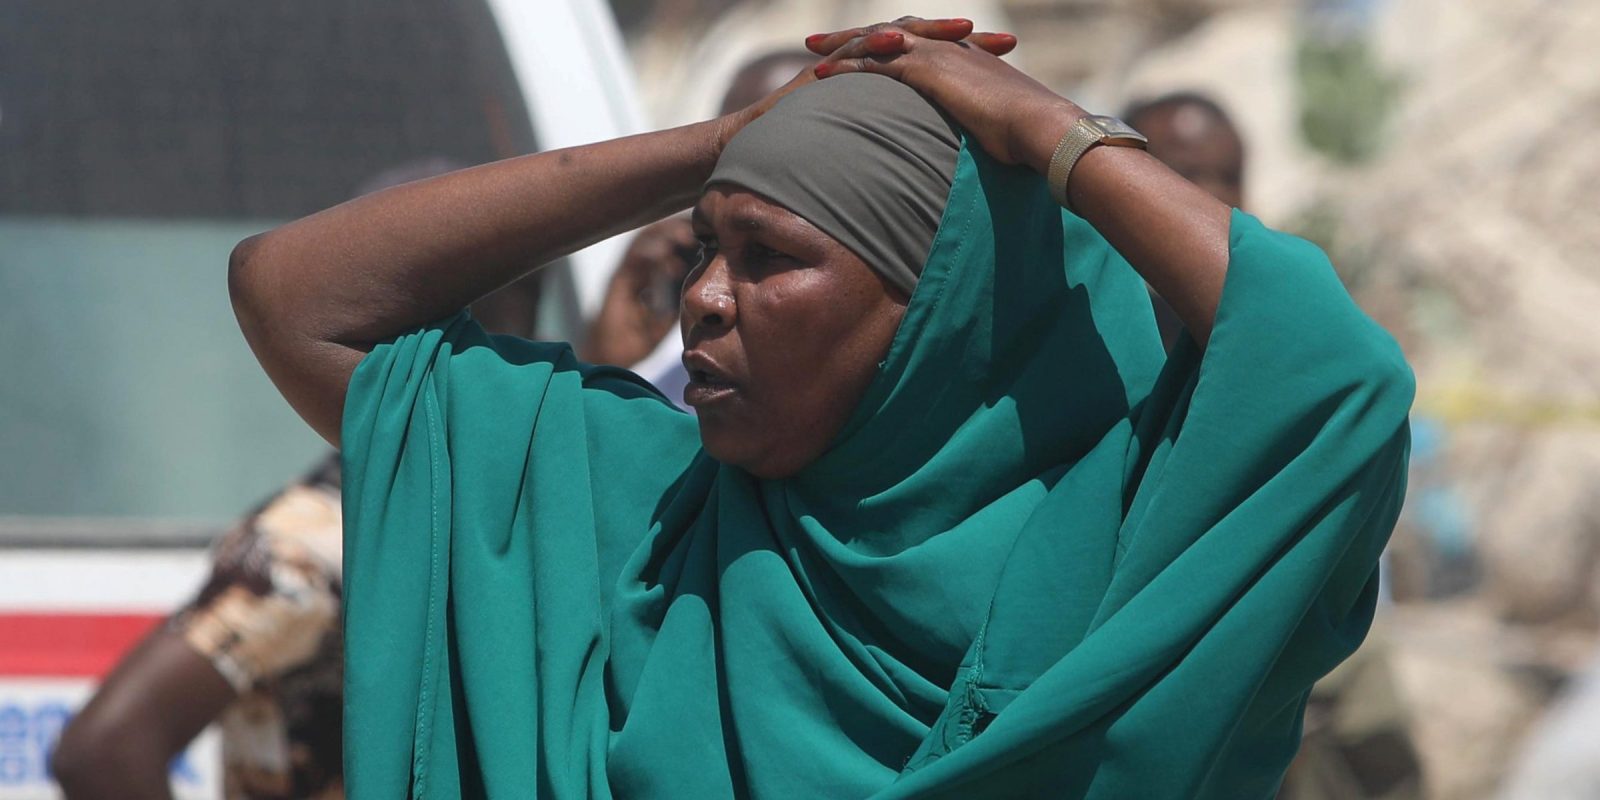 At least seven people were killed in a suicide attack in Somalia's Mogadishu